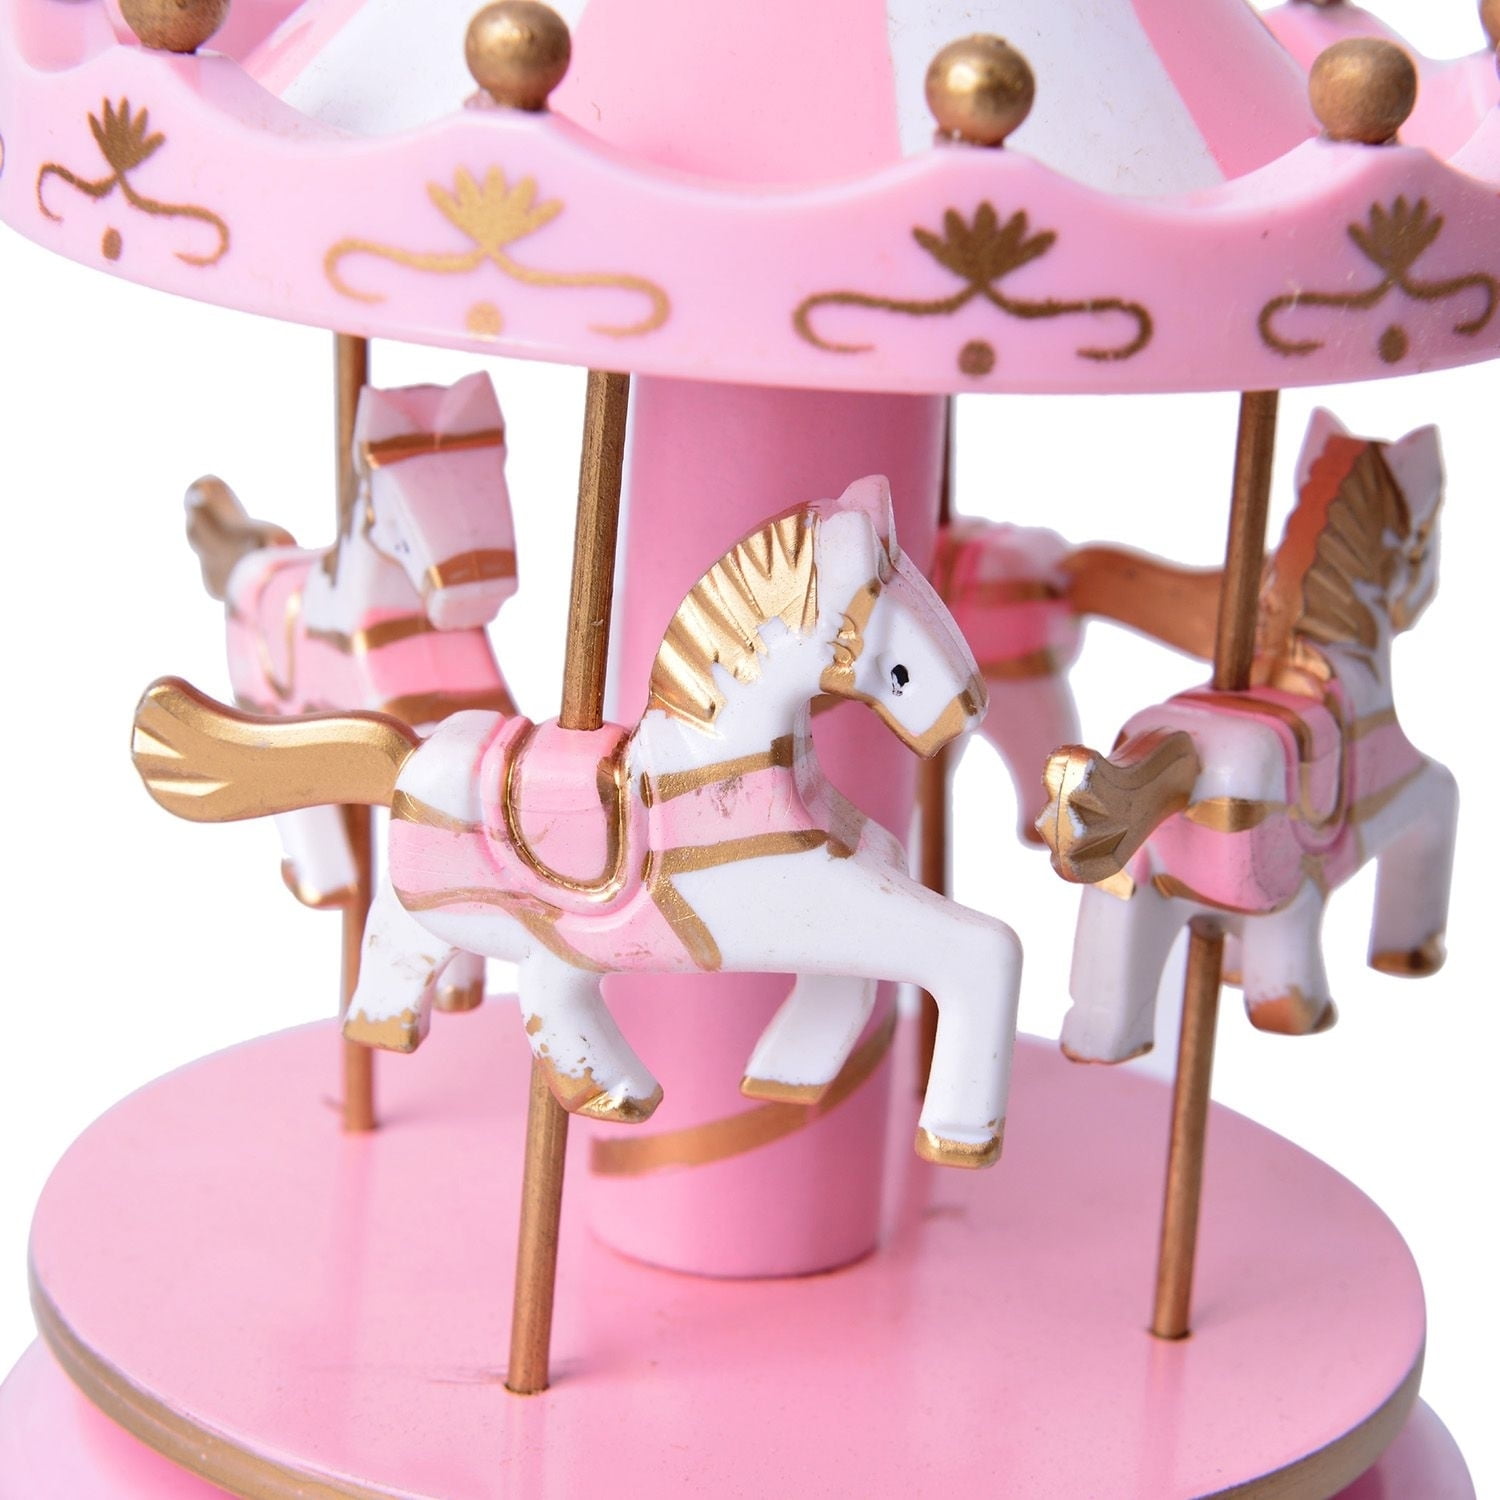 Wooden Circus 4 Horse Carousel Music Box Home Decoration Decor Gift l0z1 C5A2